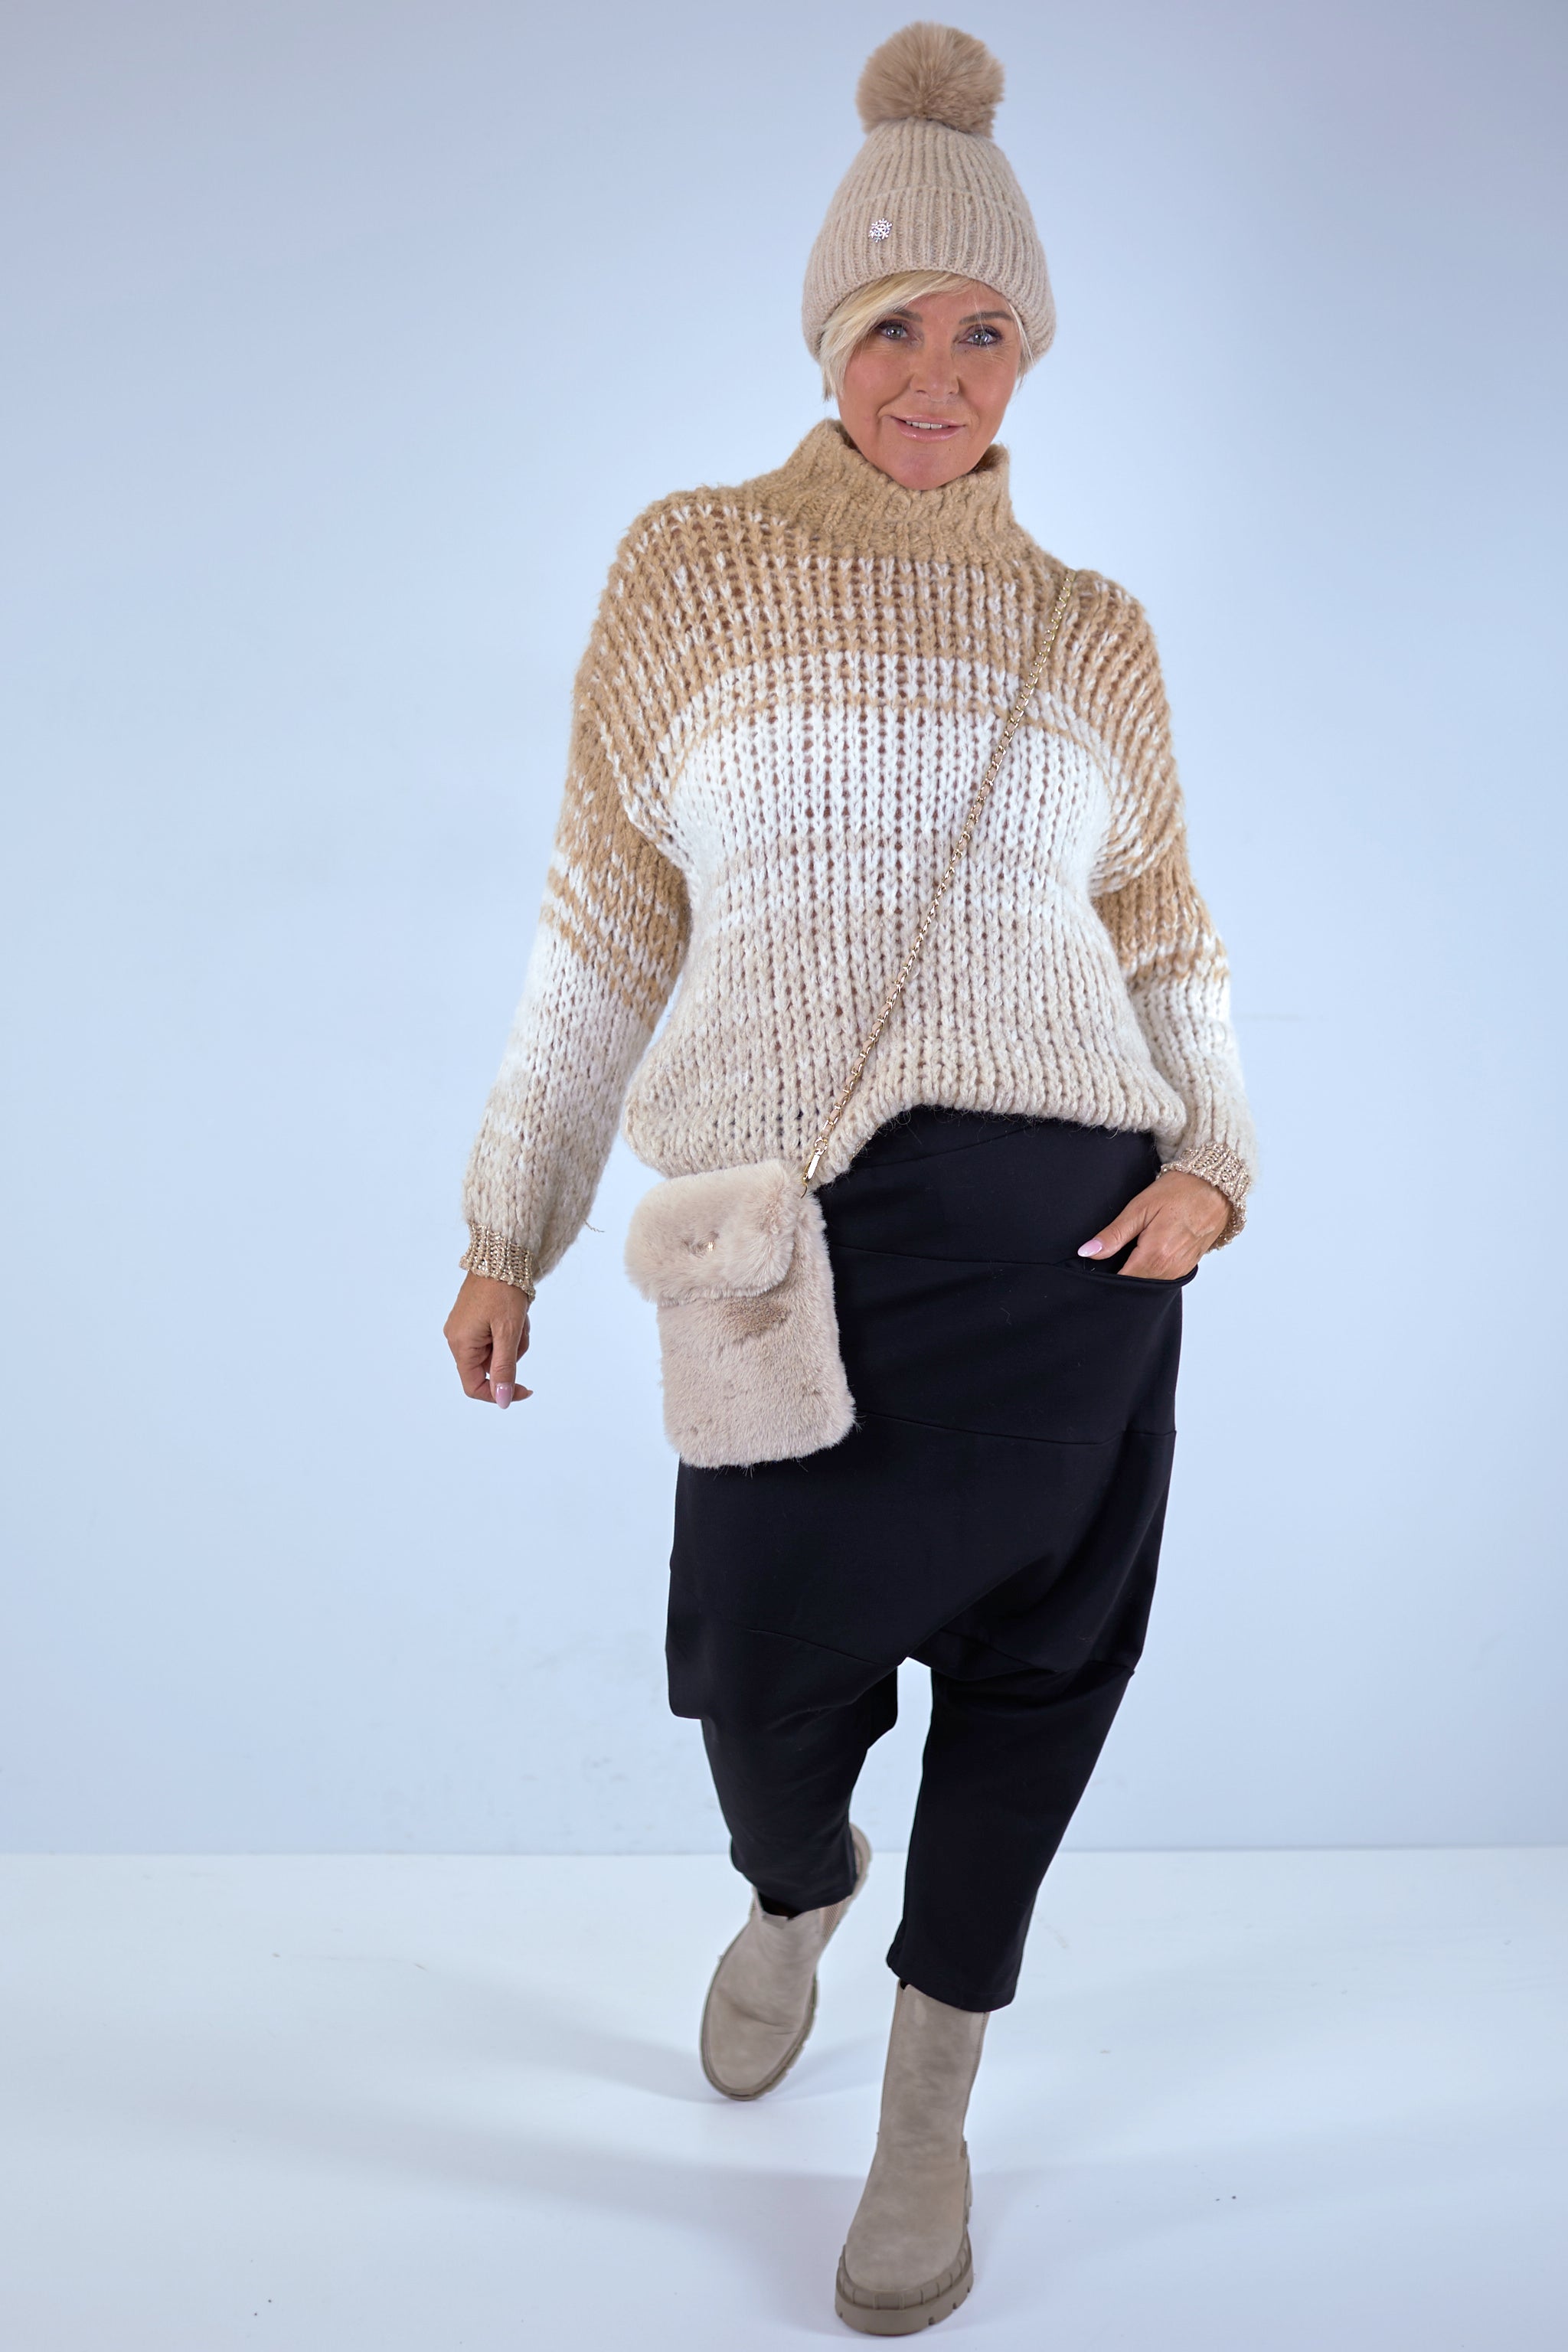 Knit sweater with color gradient, camel-beige-gold